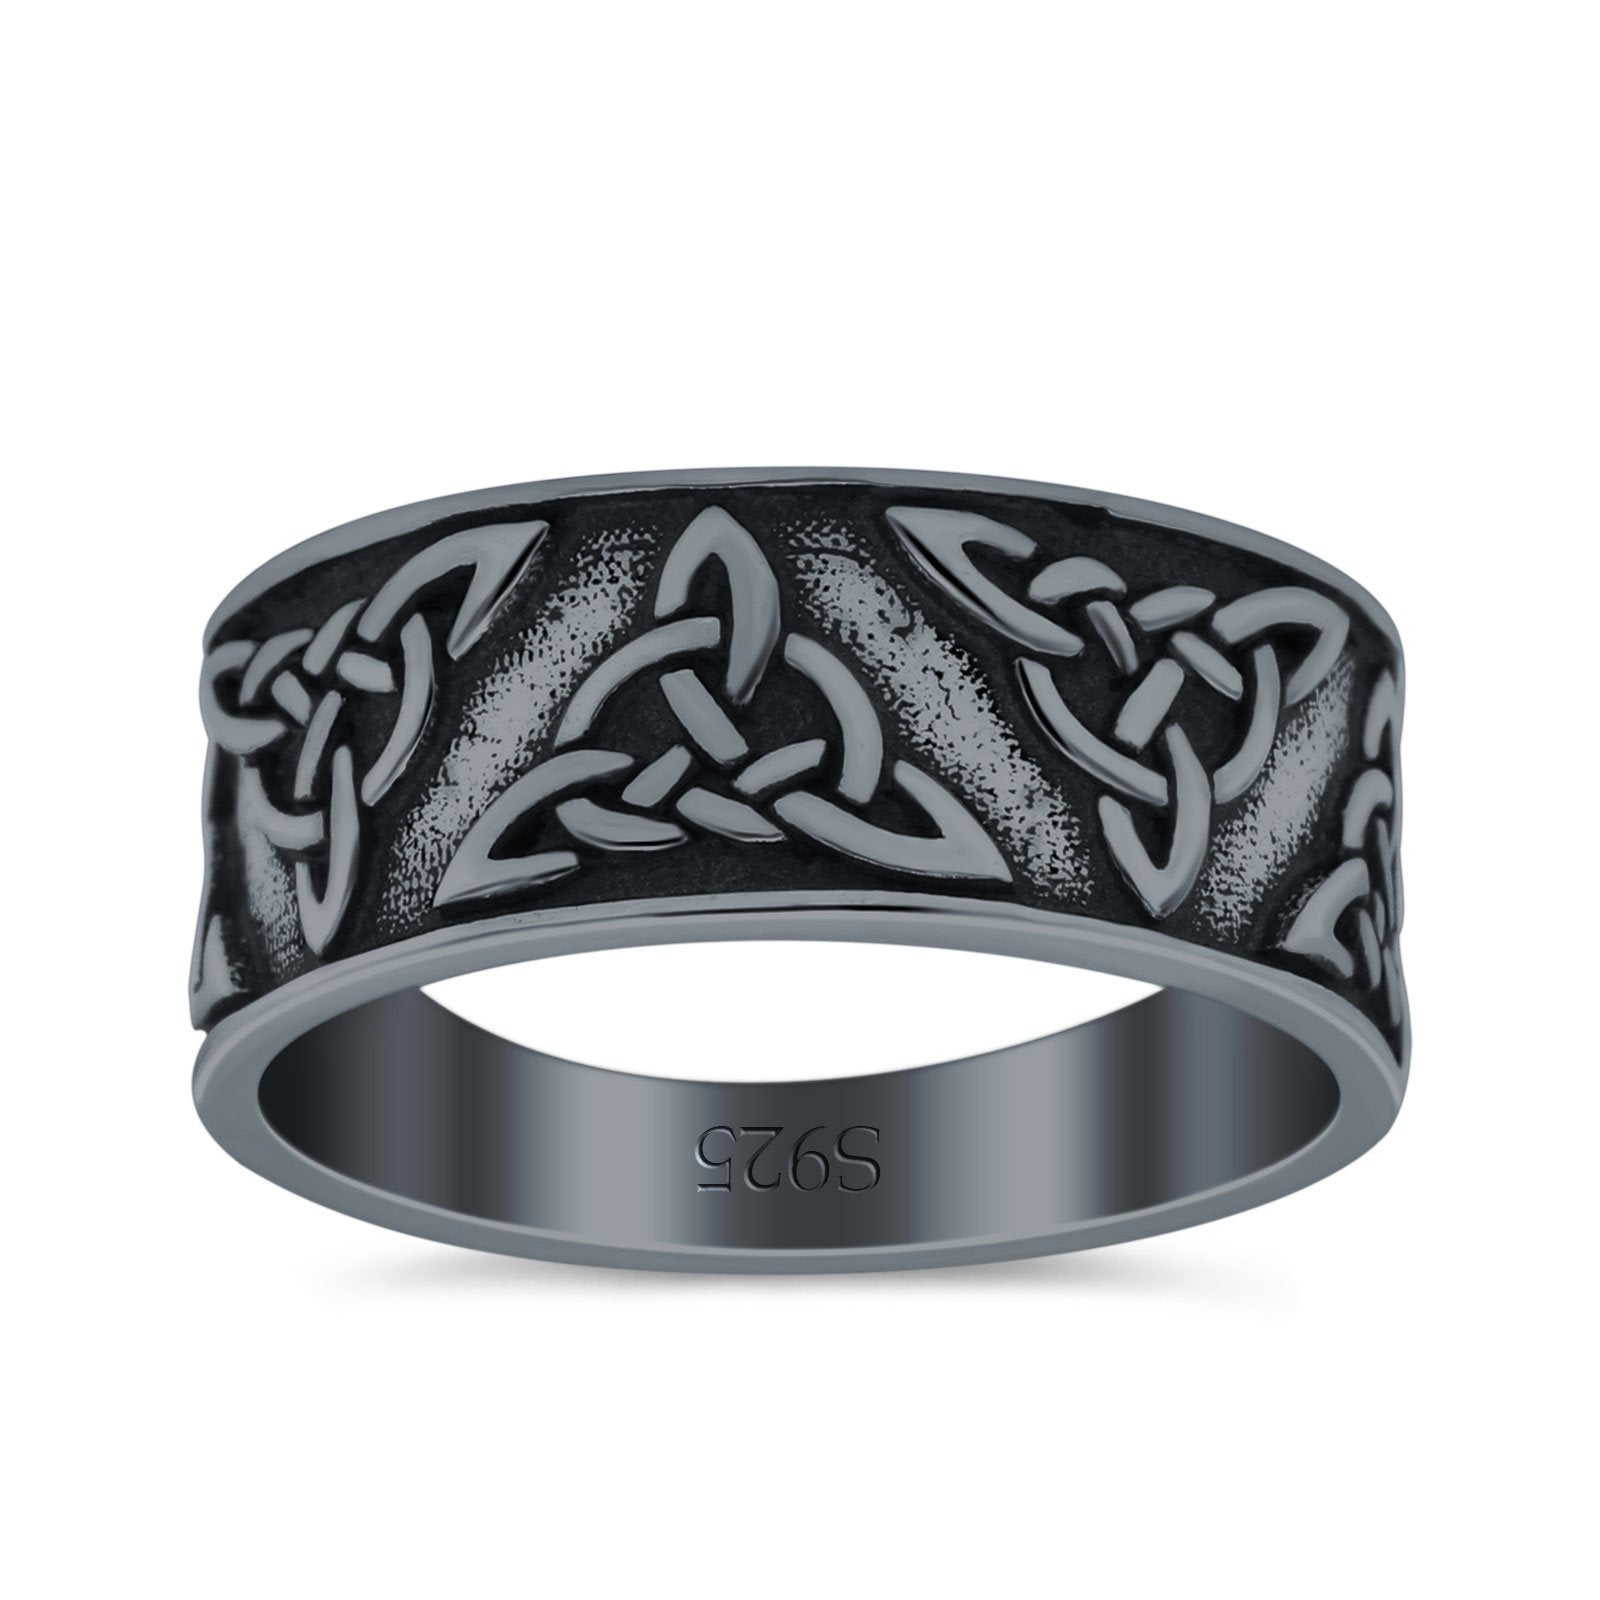 Petite Dainty Celtic Band Oxidized Ring Solid 925 Sterling Silver (7.8mm)